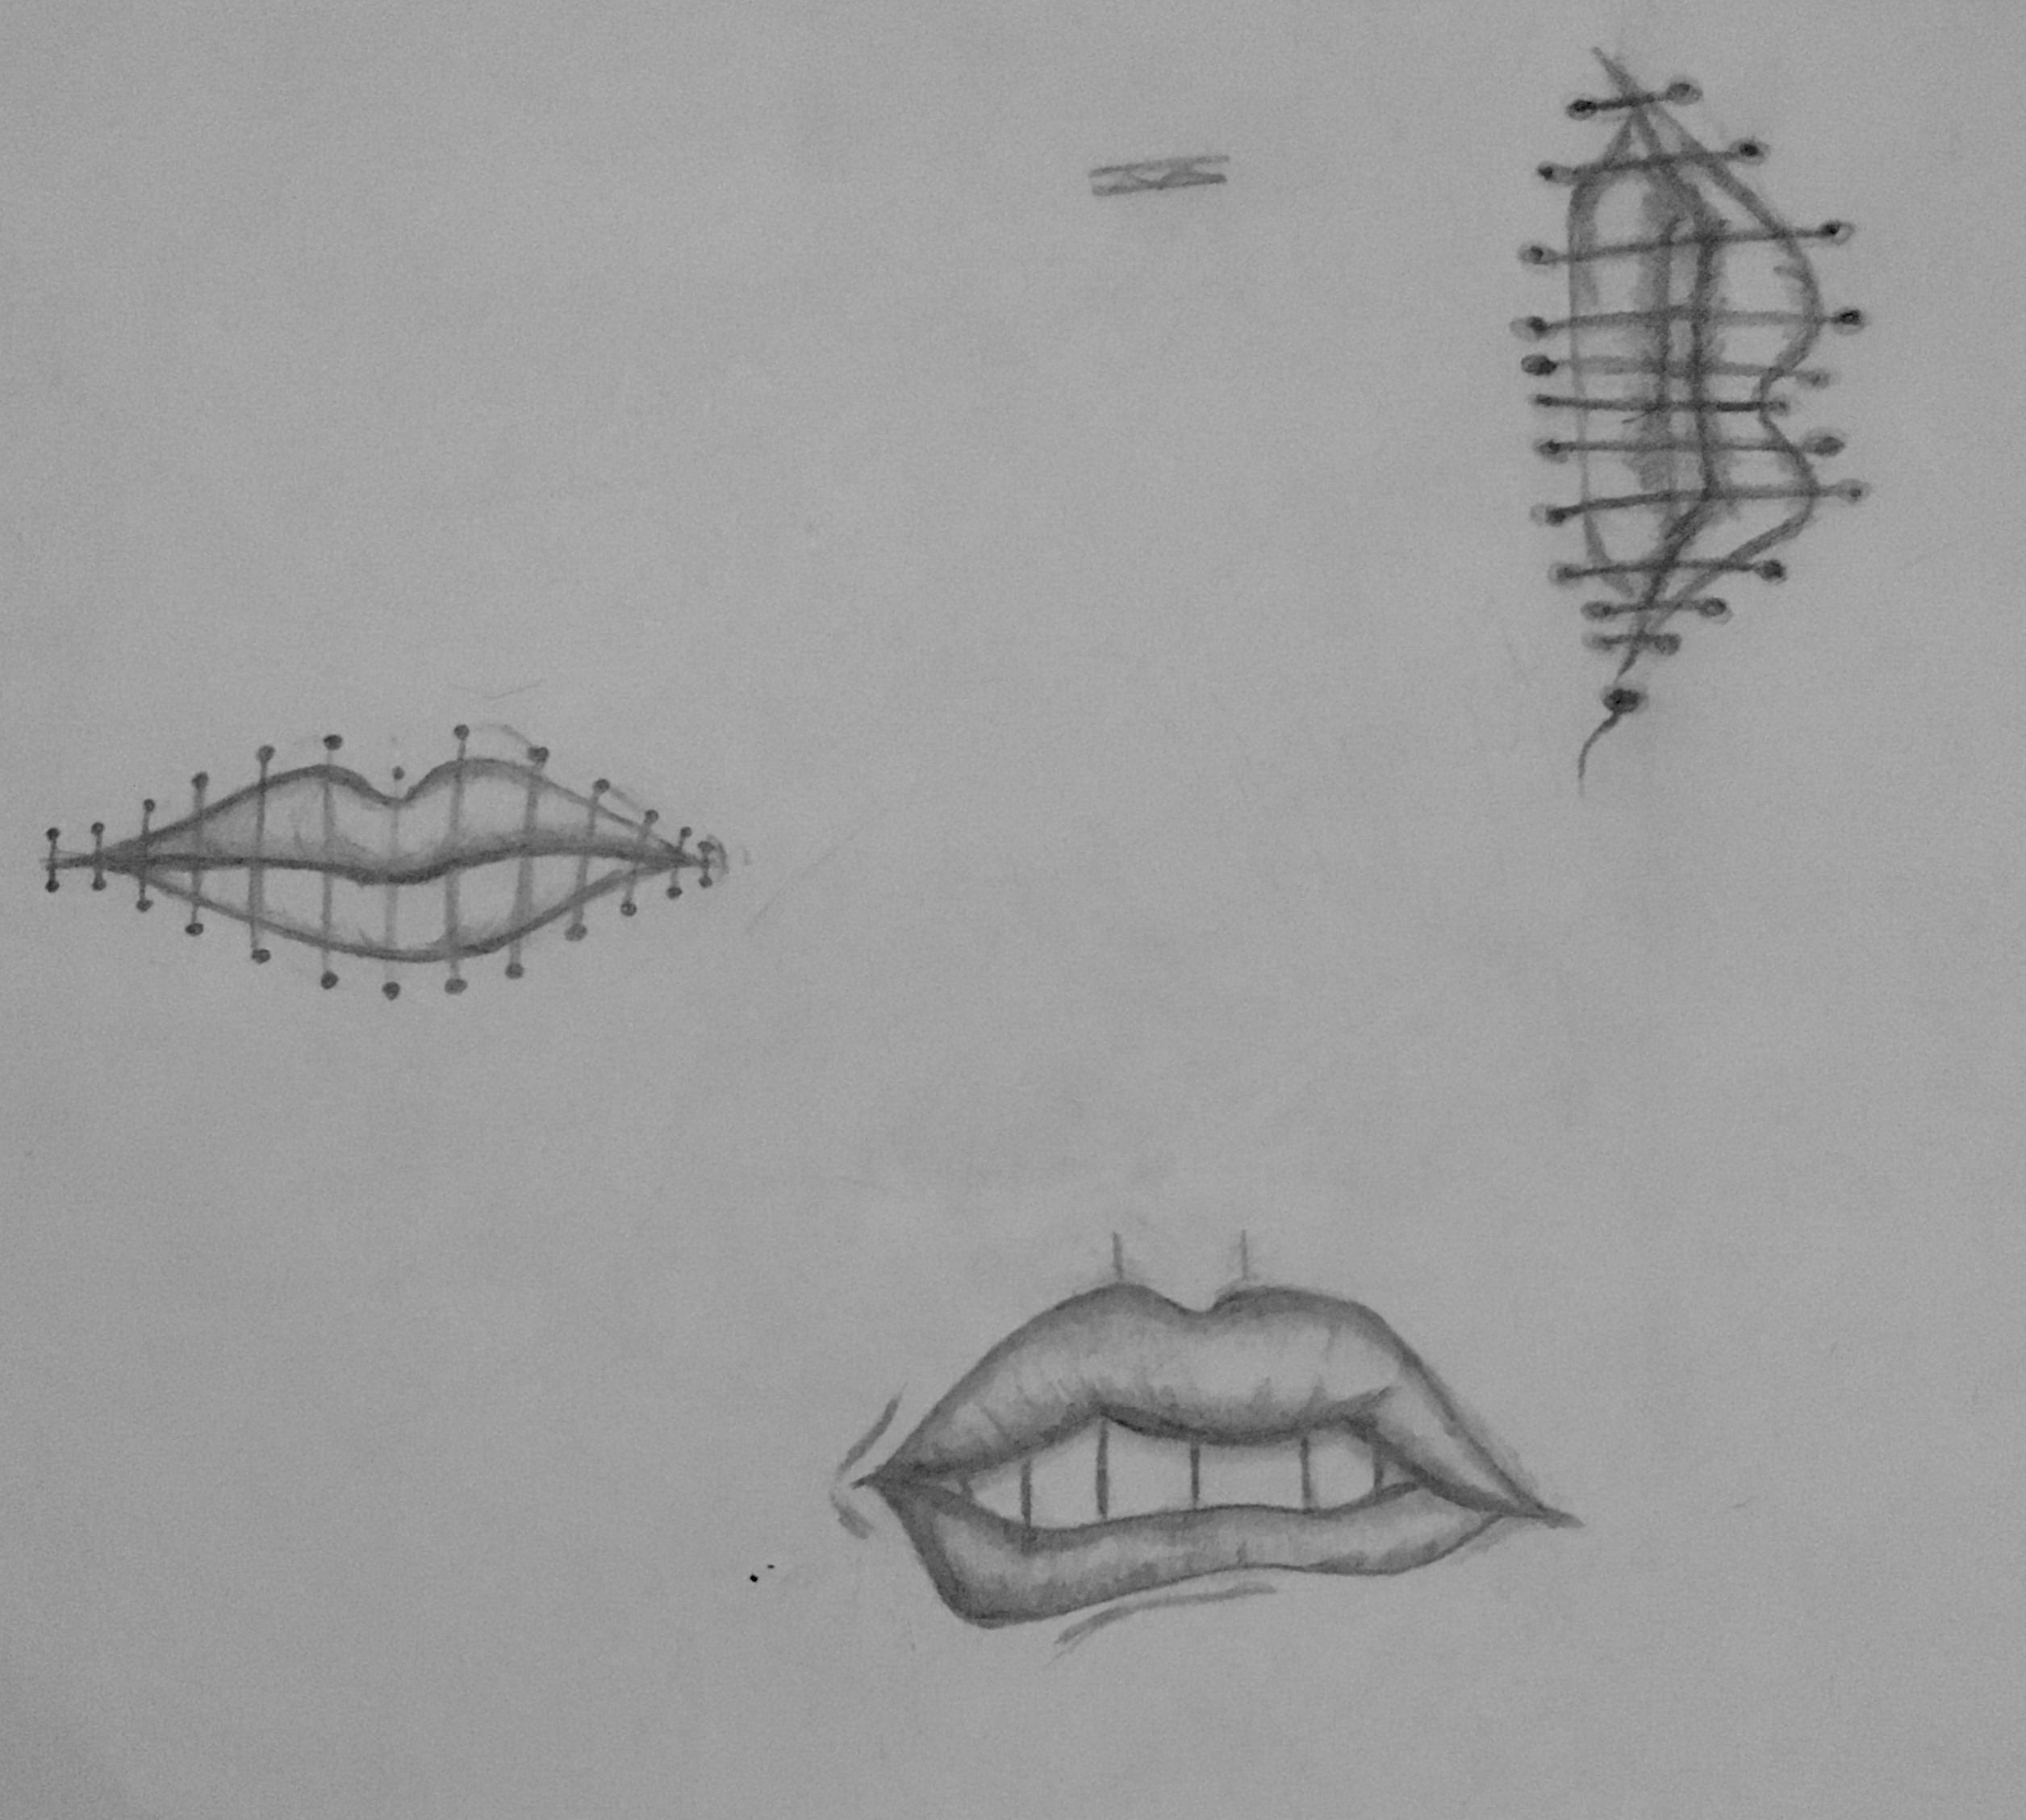 Sample from an illustrative mouth exploration.